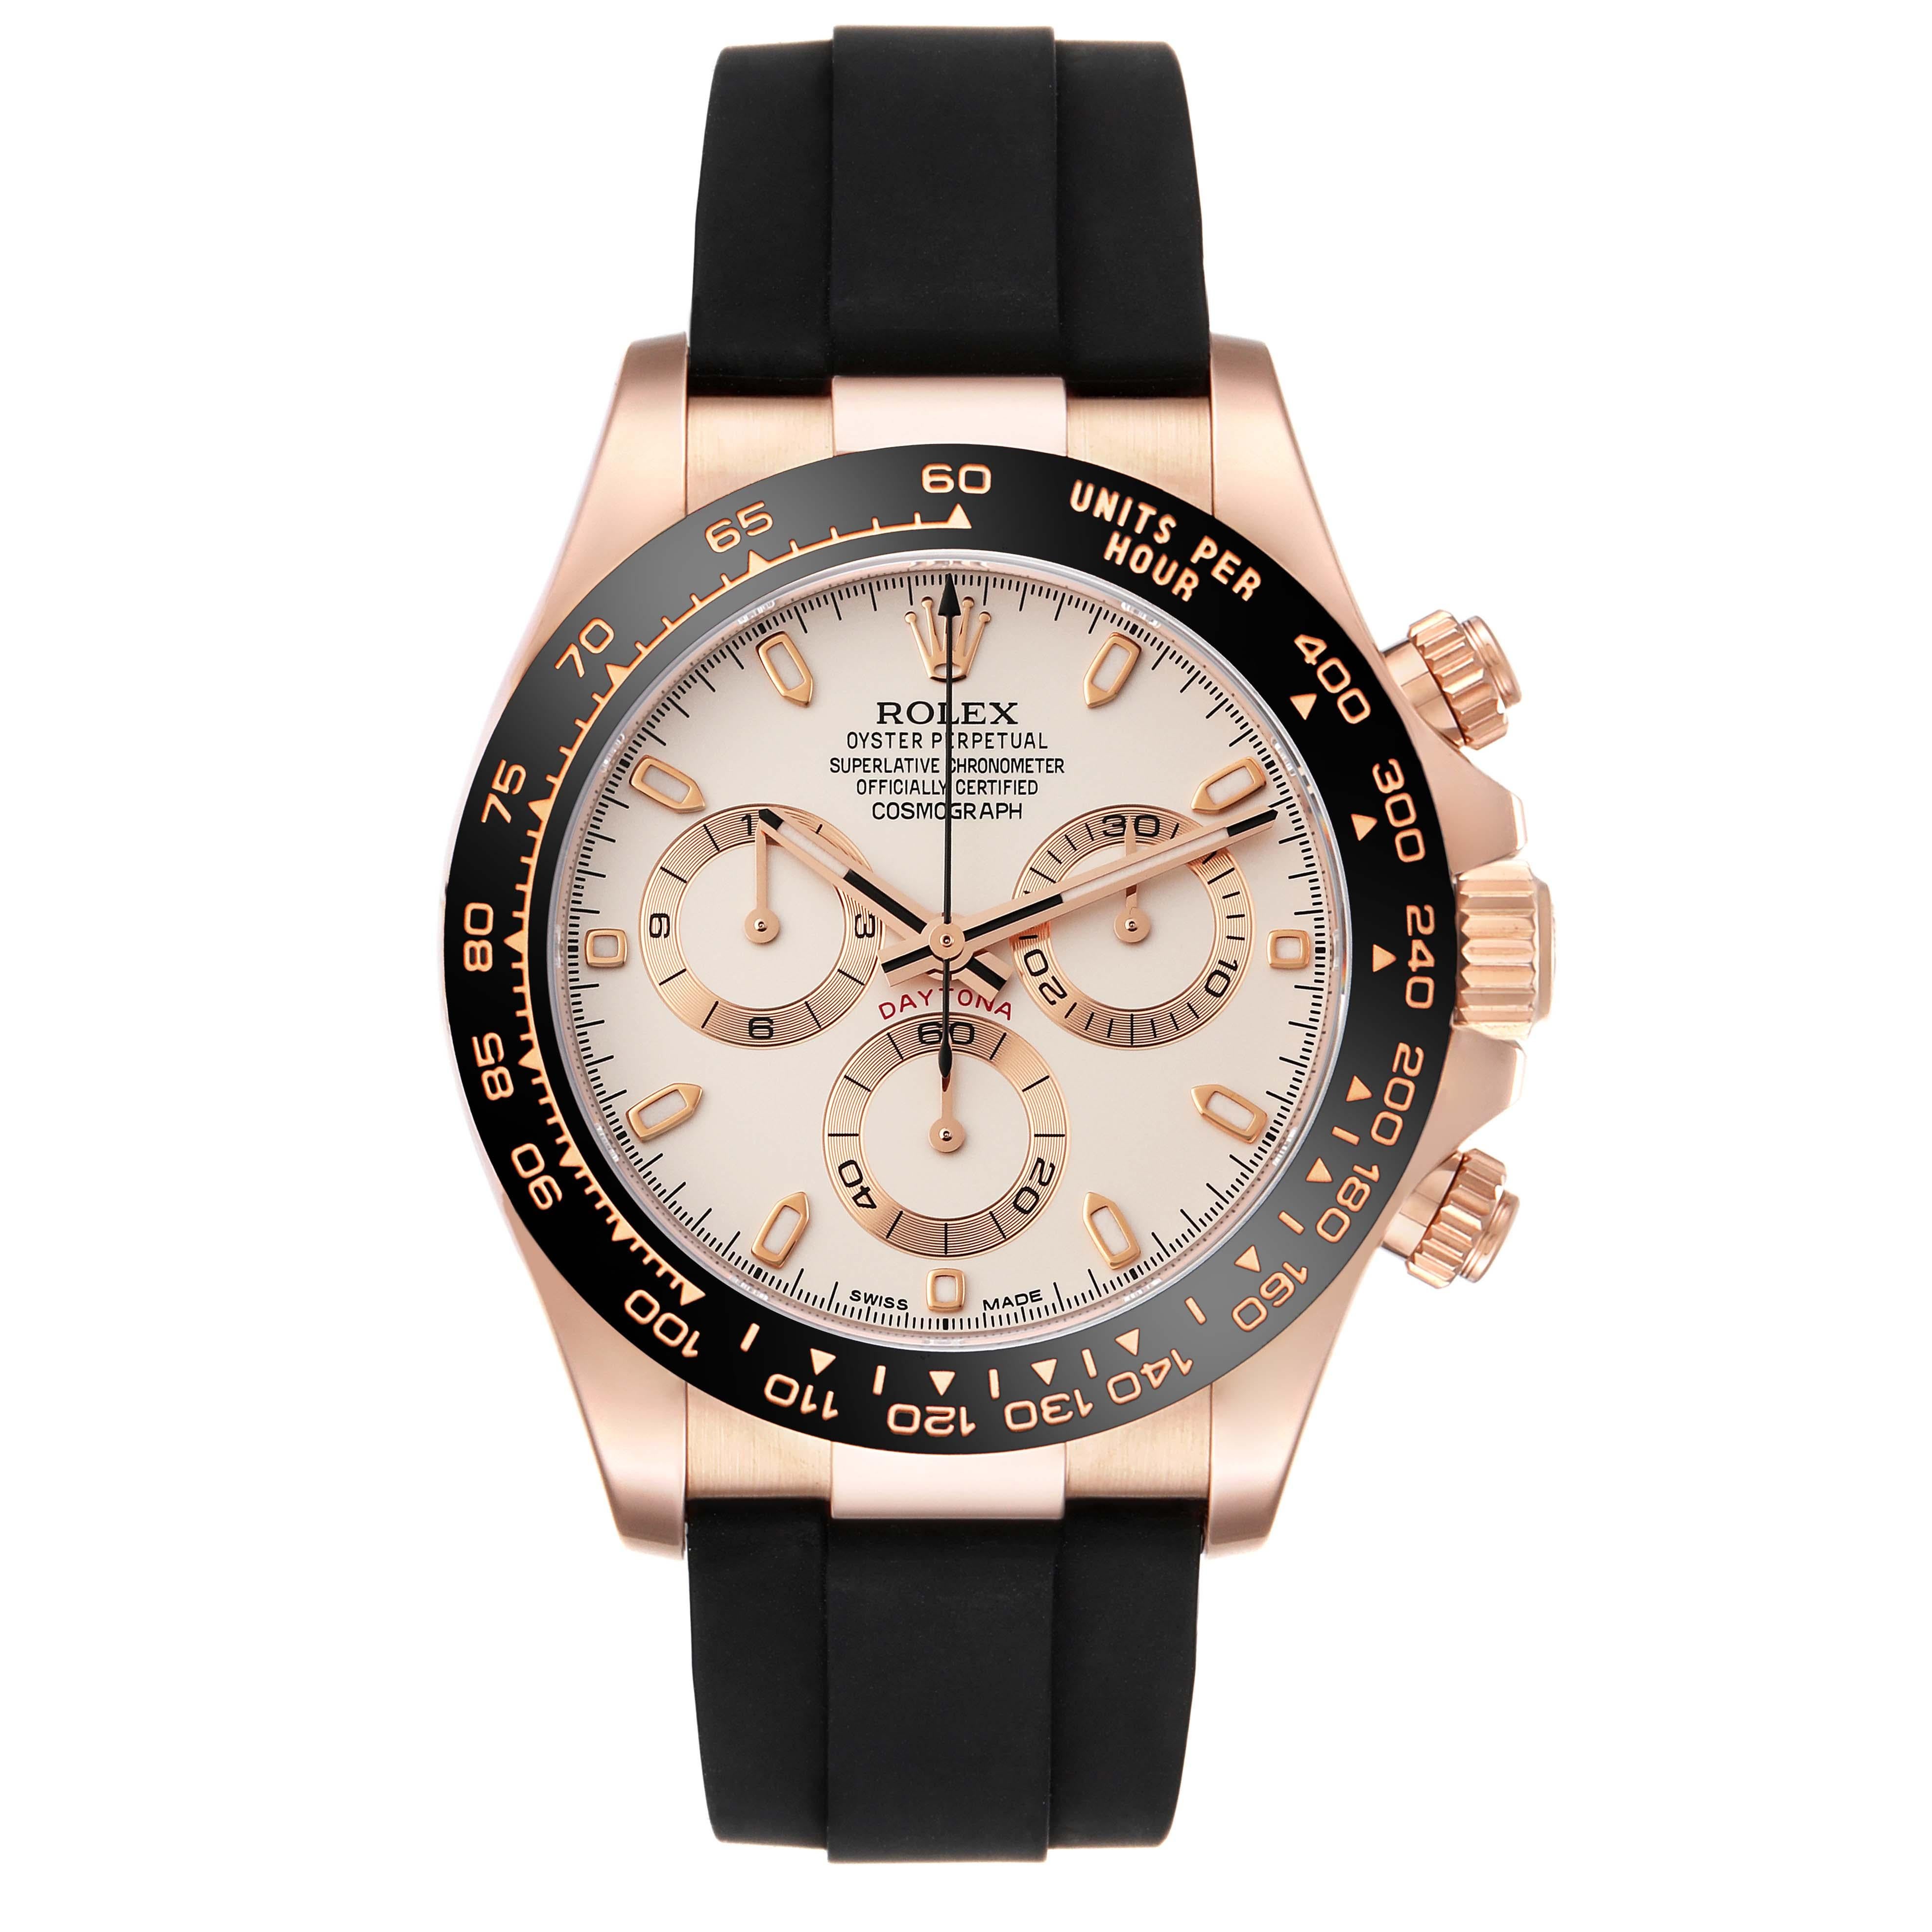 Rolex Cosmograph Daytona Rose Gold Mens Watch 116515 Box Card. Officially certified chronometer automatic self-winding movement. 18k rose gold case 40.0 mm in diameter. Special screw-down push buttons. Screw-down caseback. Chronograph pushers and